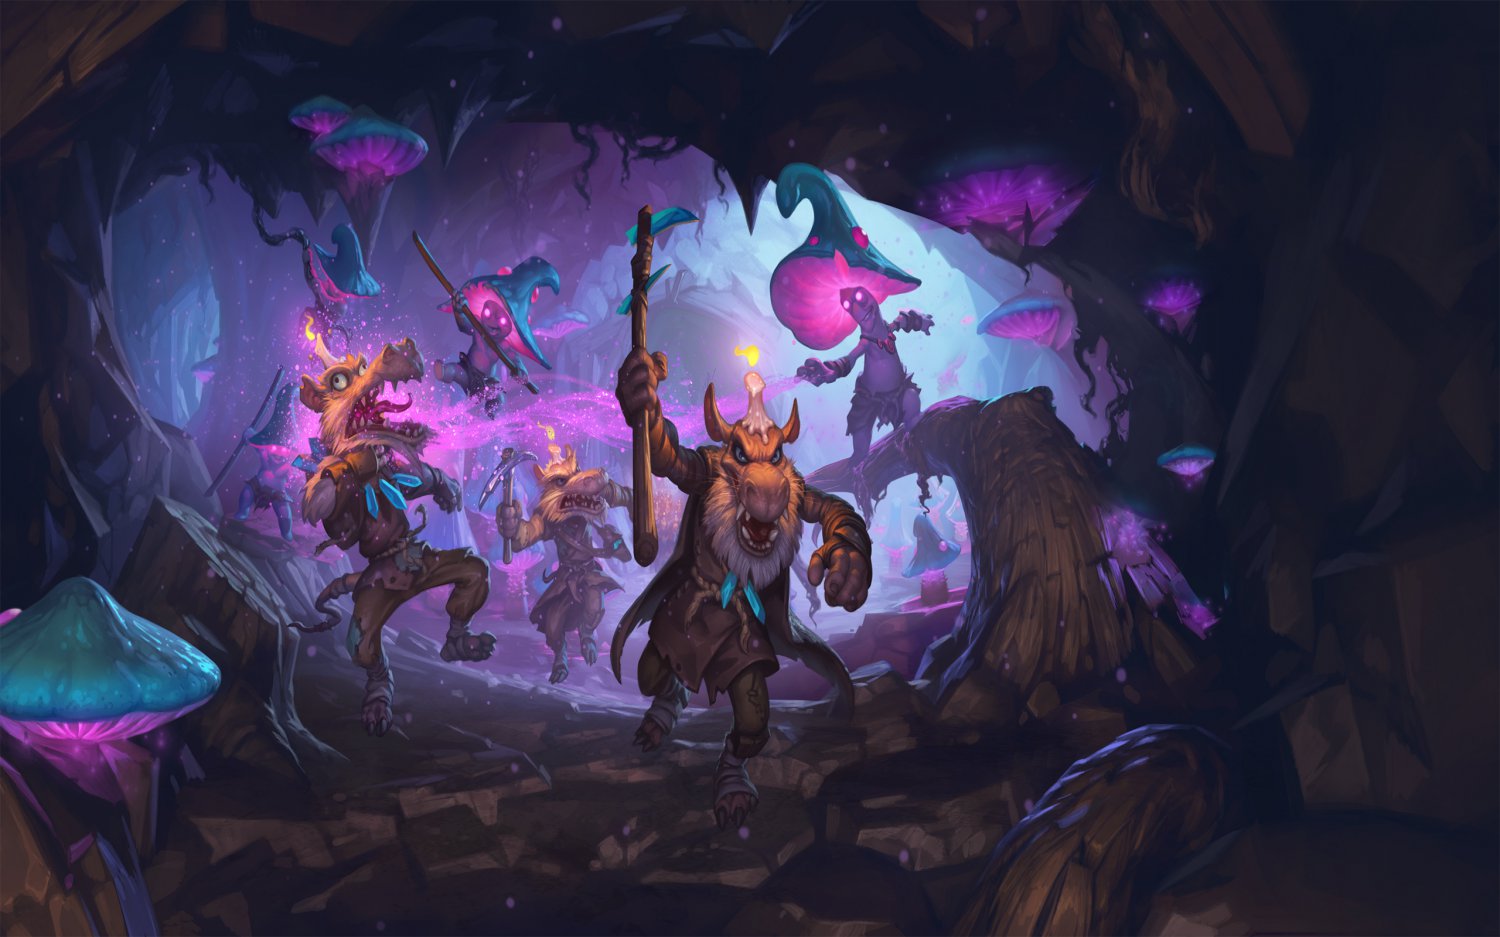 Hearthstone Kobolds and Catacombs  Game  13"x19" (32cm/49cm) Poster